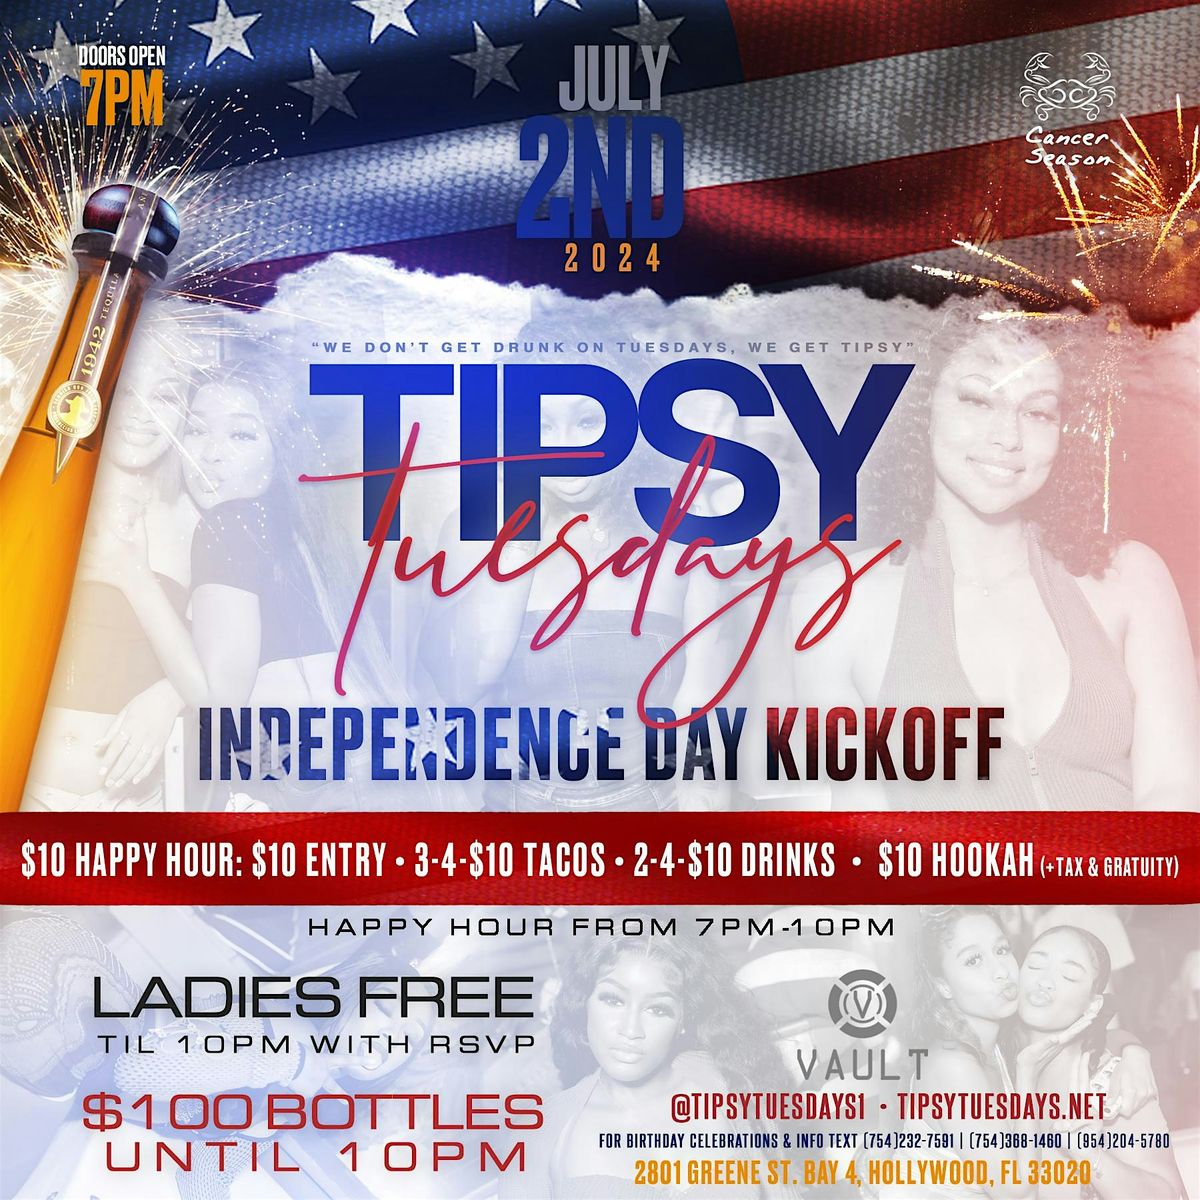 Tipsy Tuesdays: Tipsypendence Day (Independence Day Kickoff)